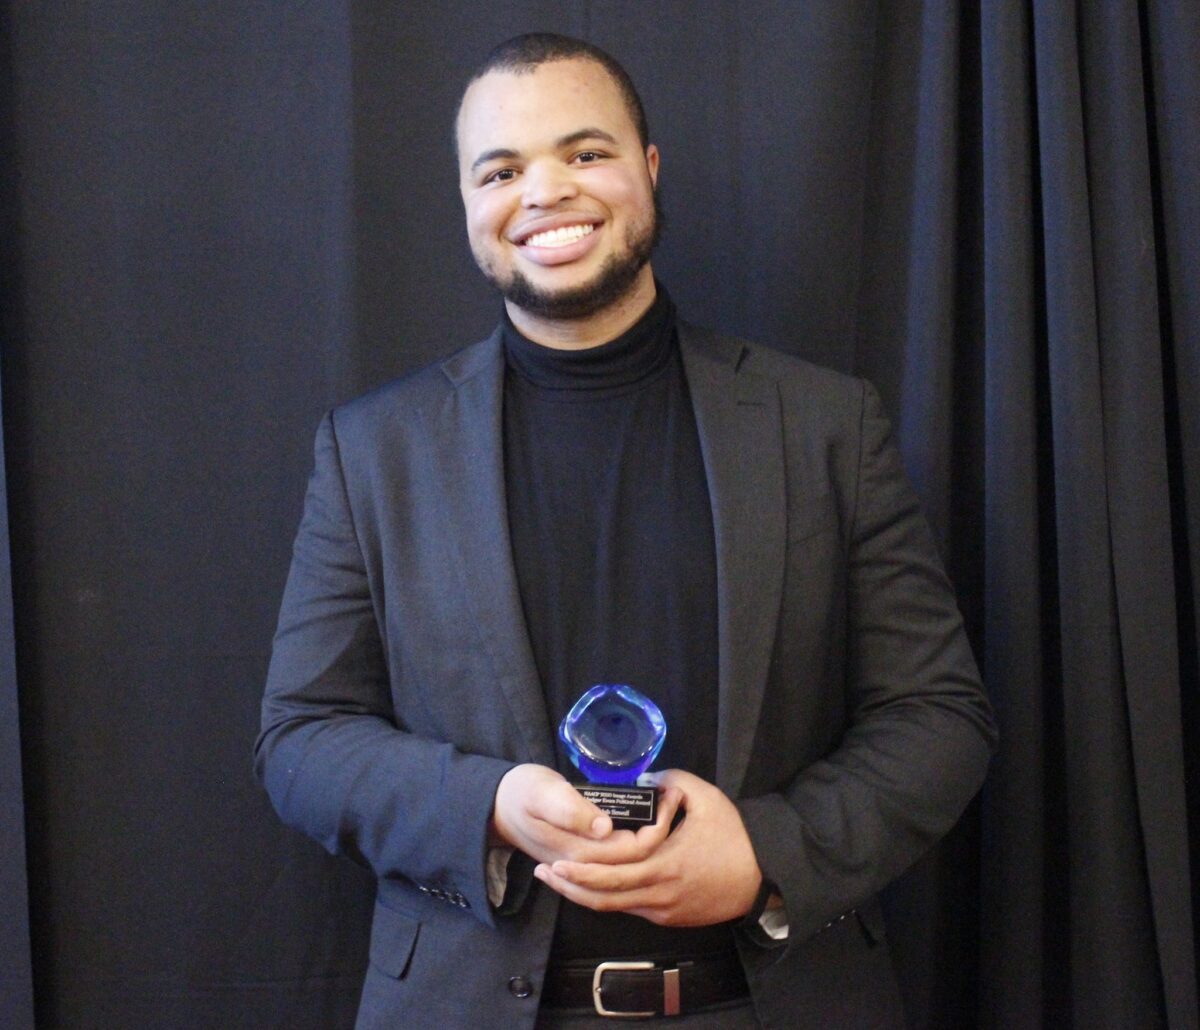 Caleb Sewell in a dark jacket and shirt holding the award.